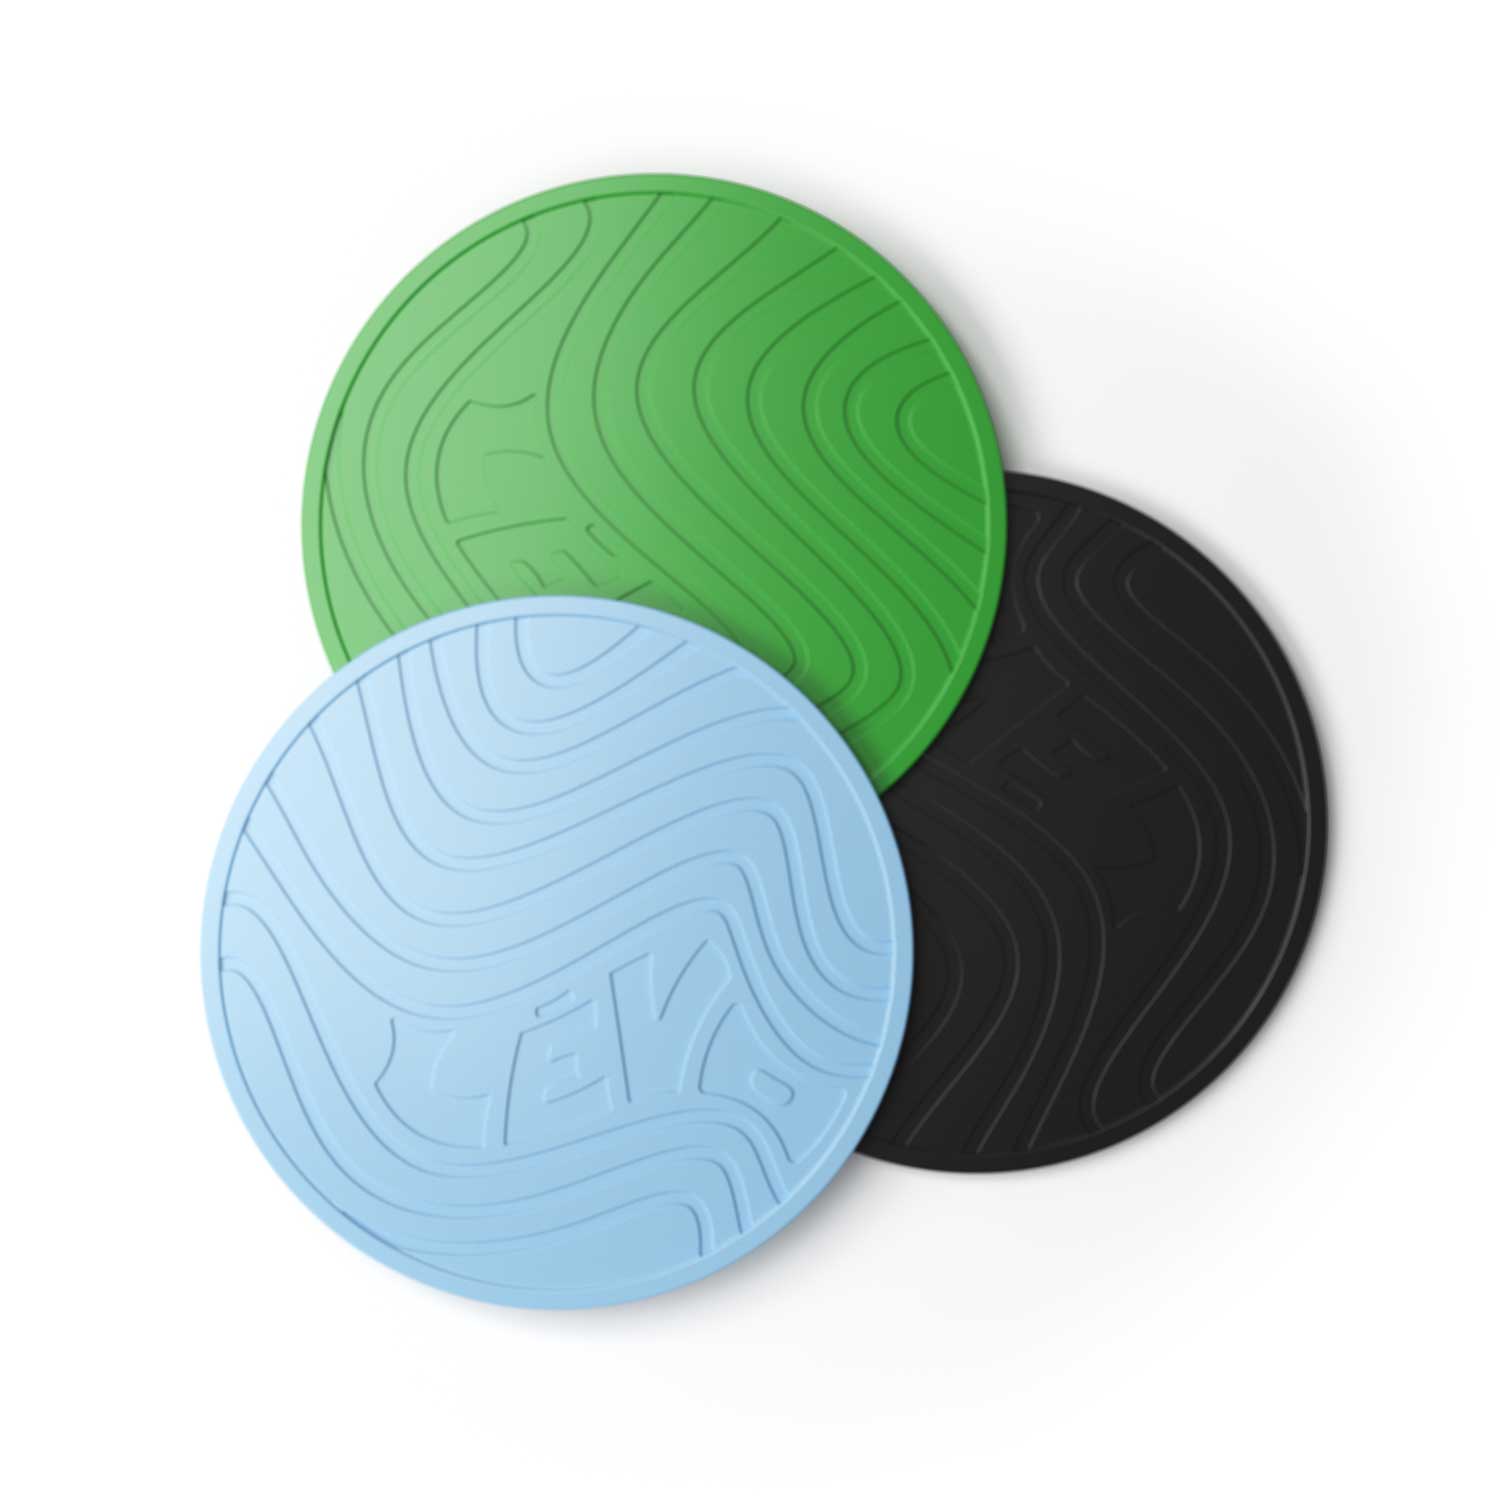 LĒVO Silicone Trivets in green, blue, and black